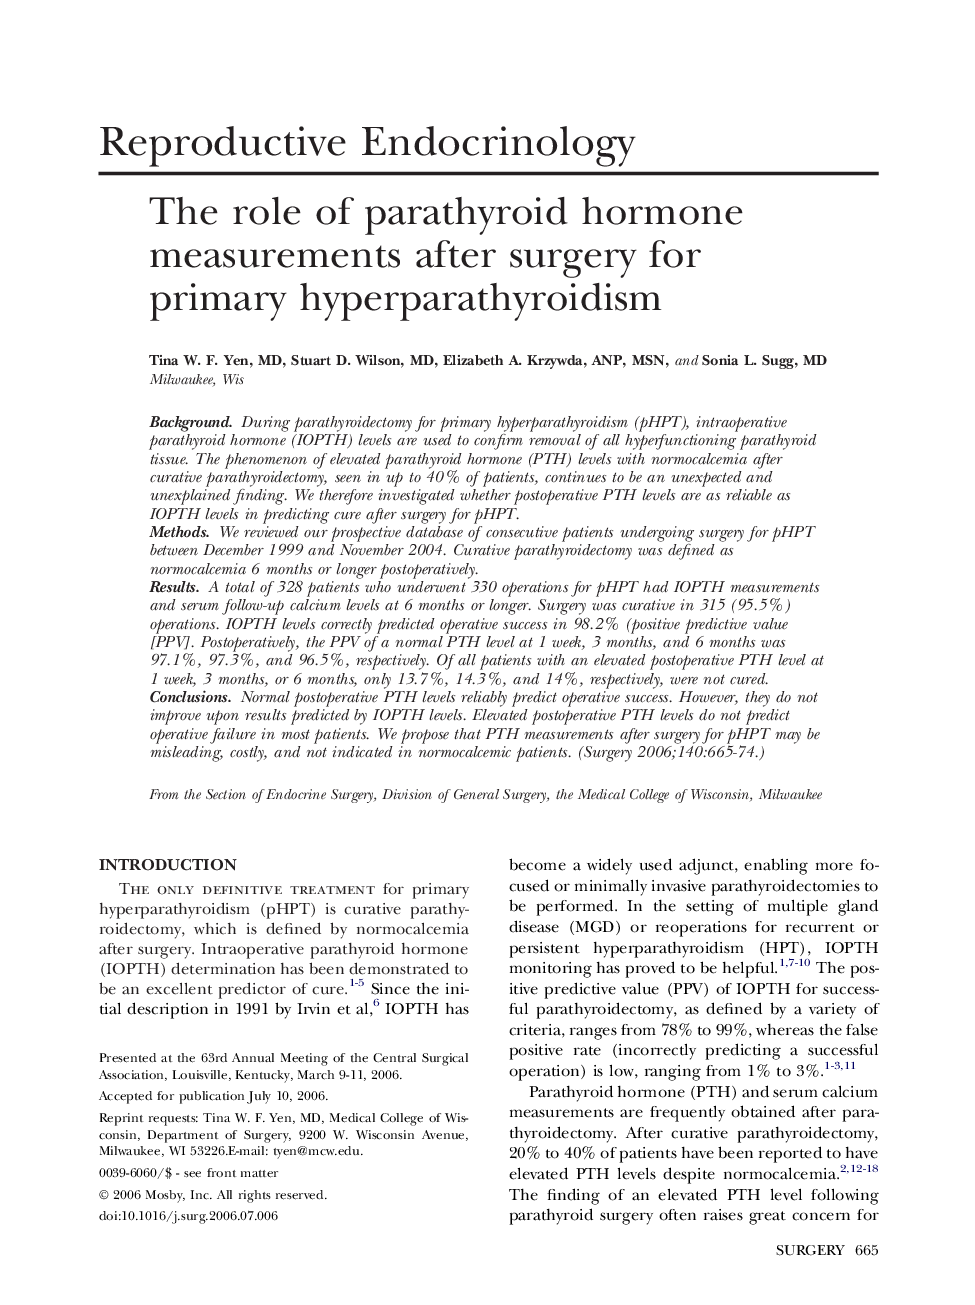 The role of parathyroid hormone measurements after surgery for primary hyperparathyroidism